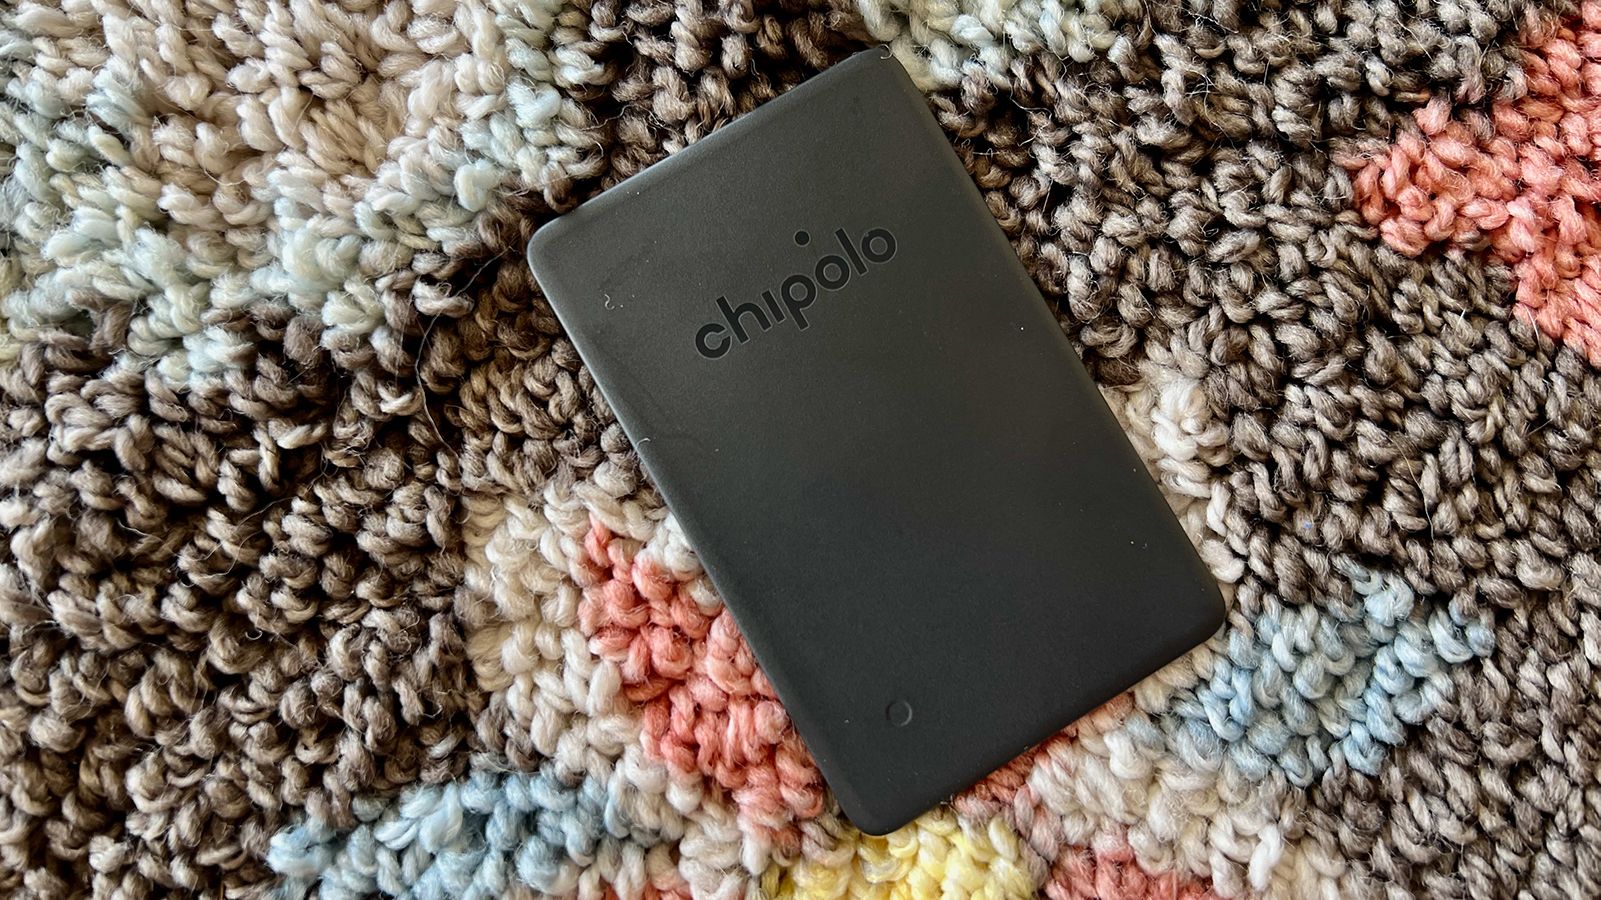 Chipolo One Finder Review - MacSources